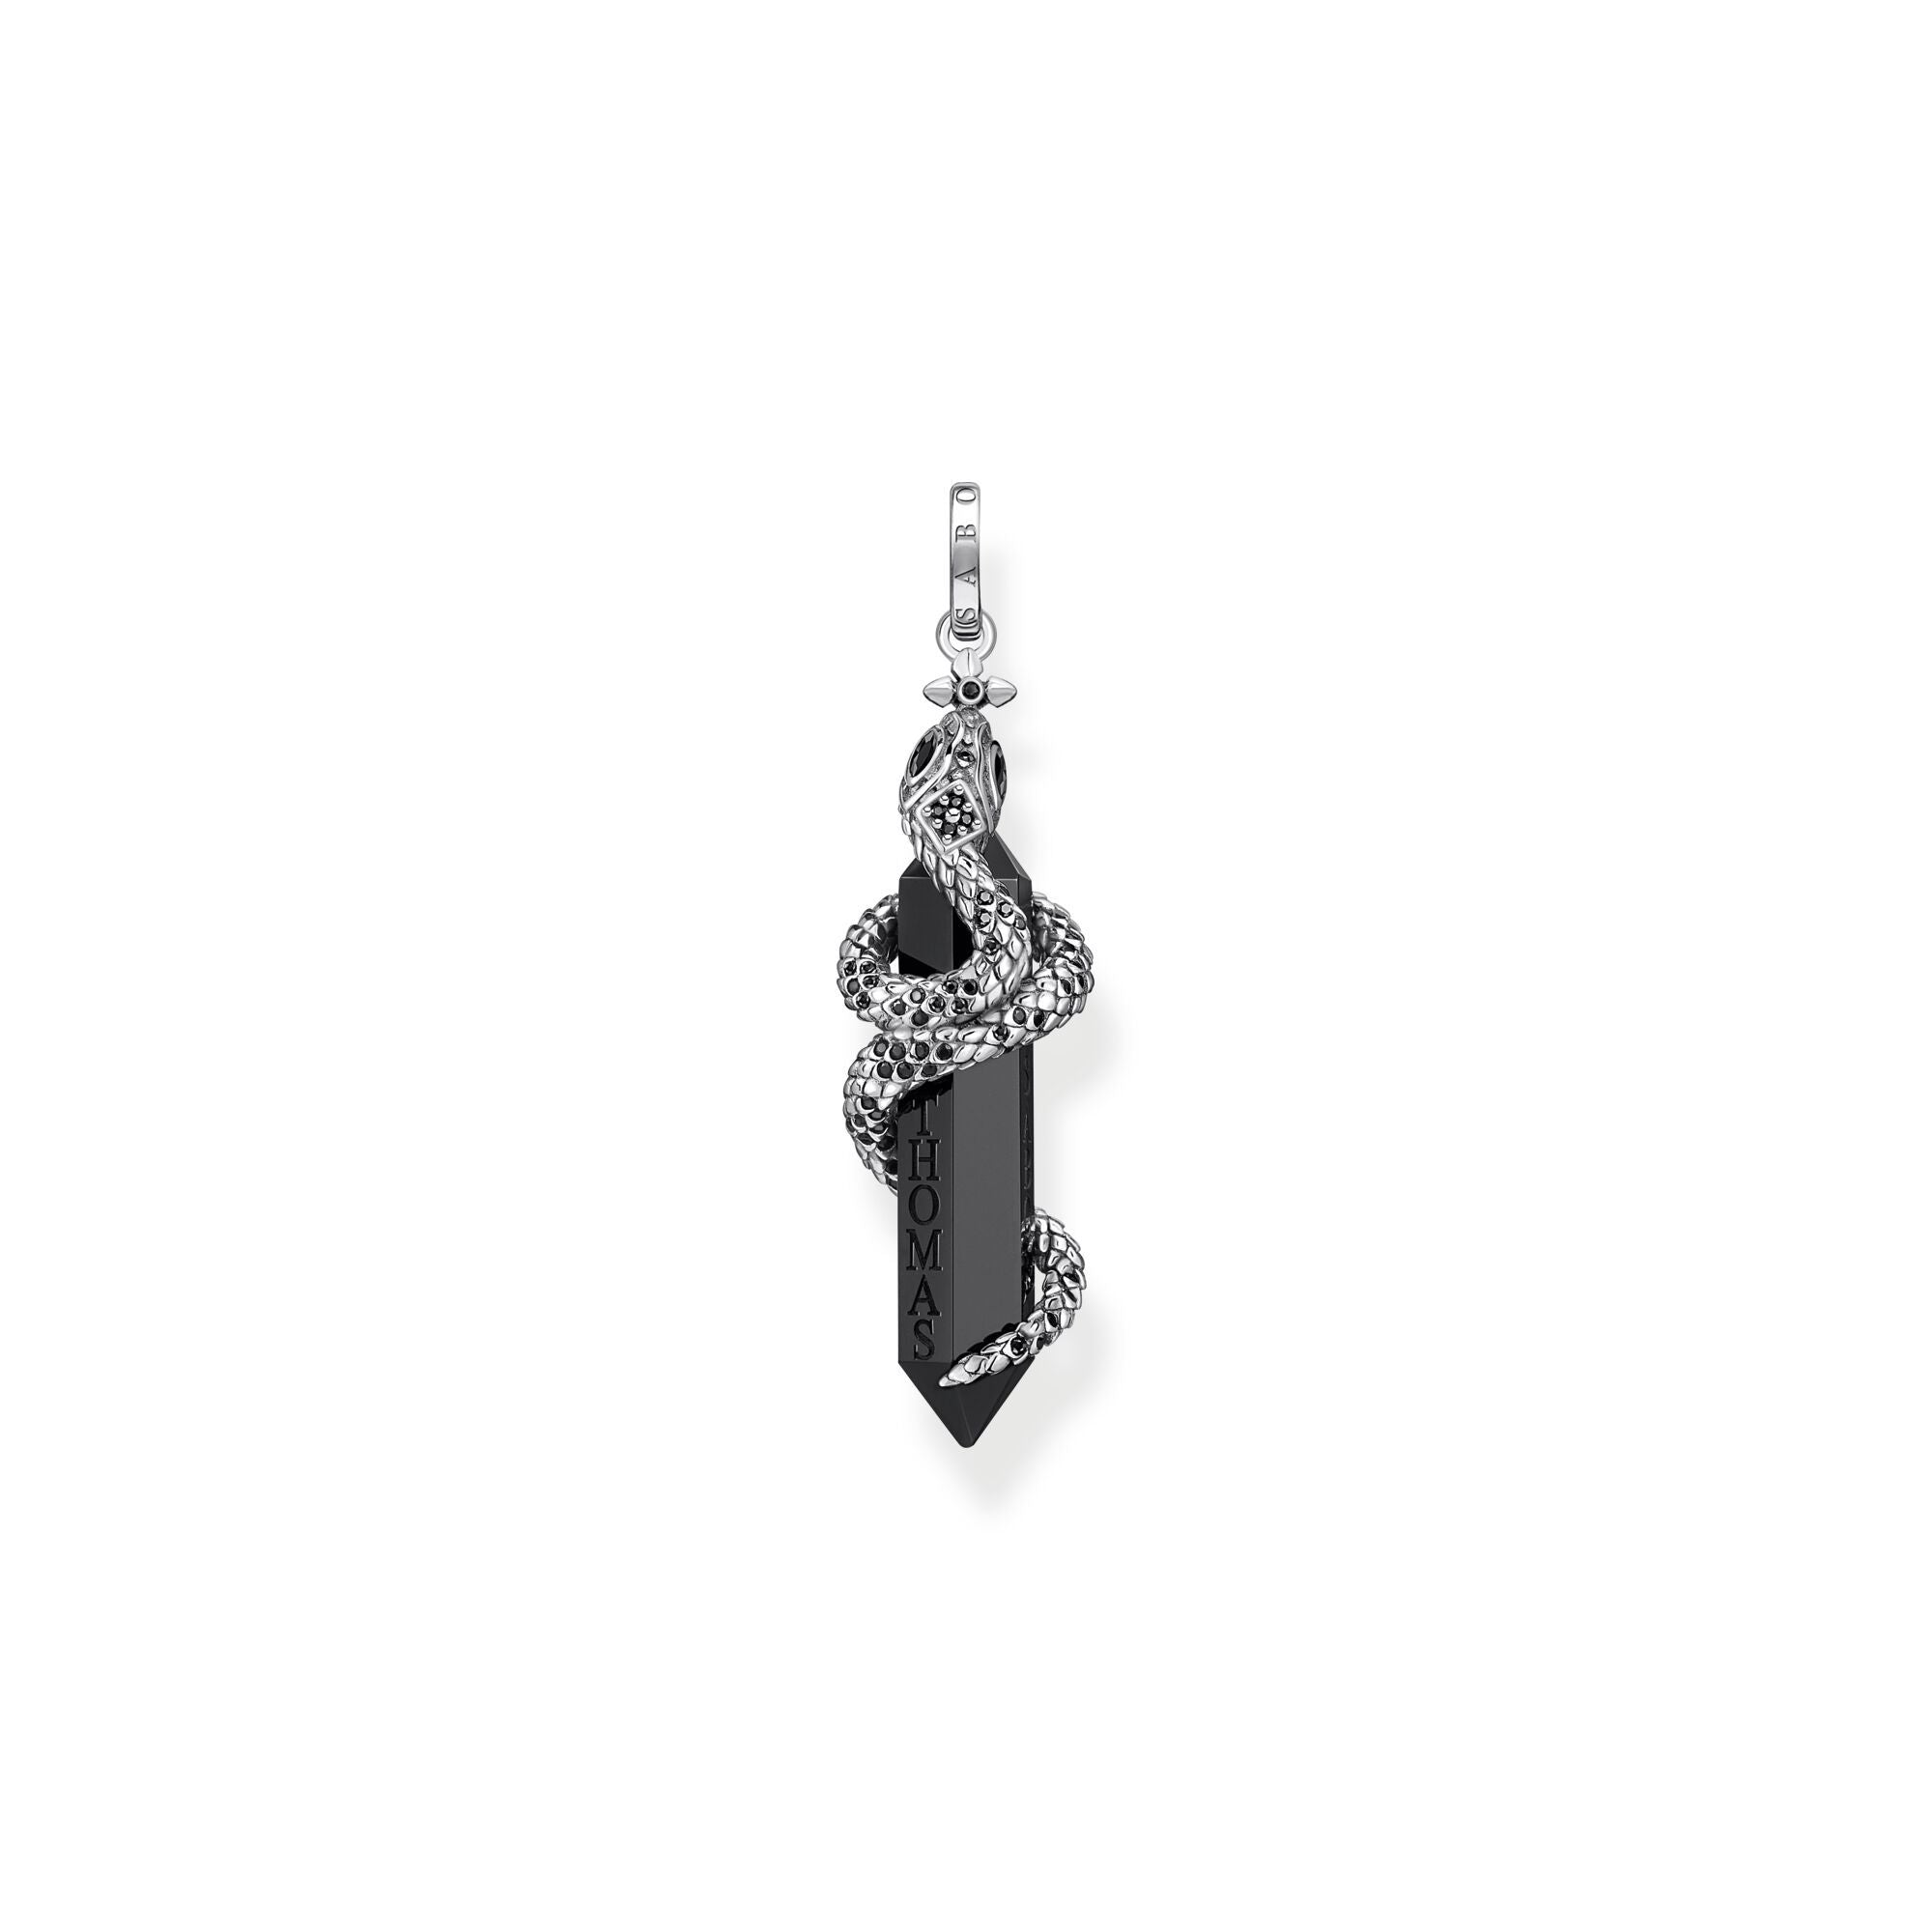 Thomas Sabo Sterling Silver Blackened Onyx with Snake Pendant